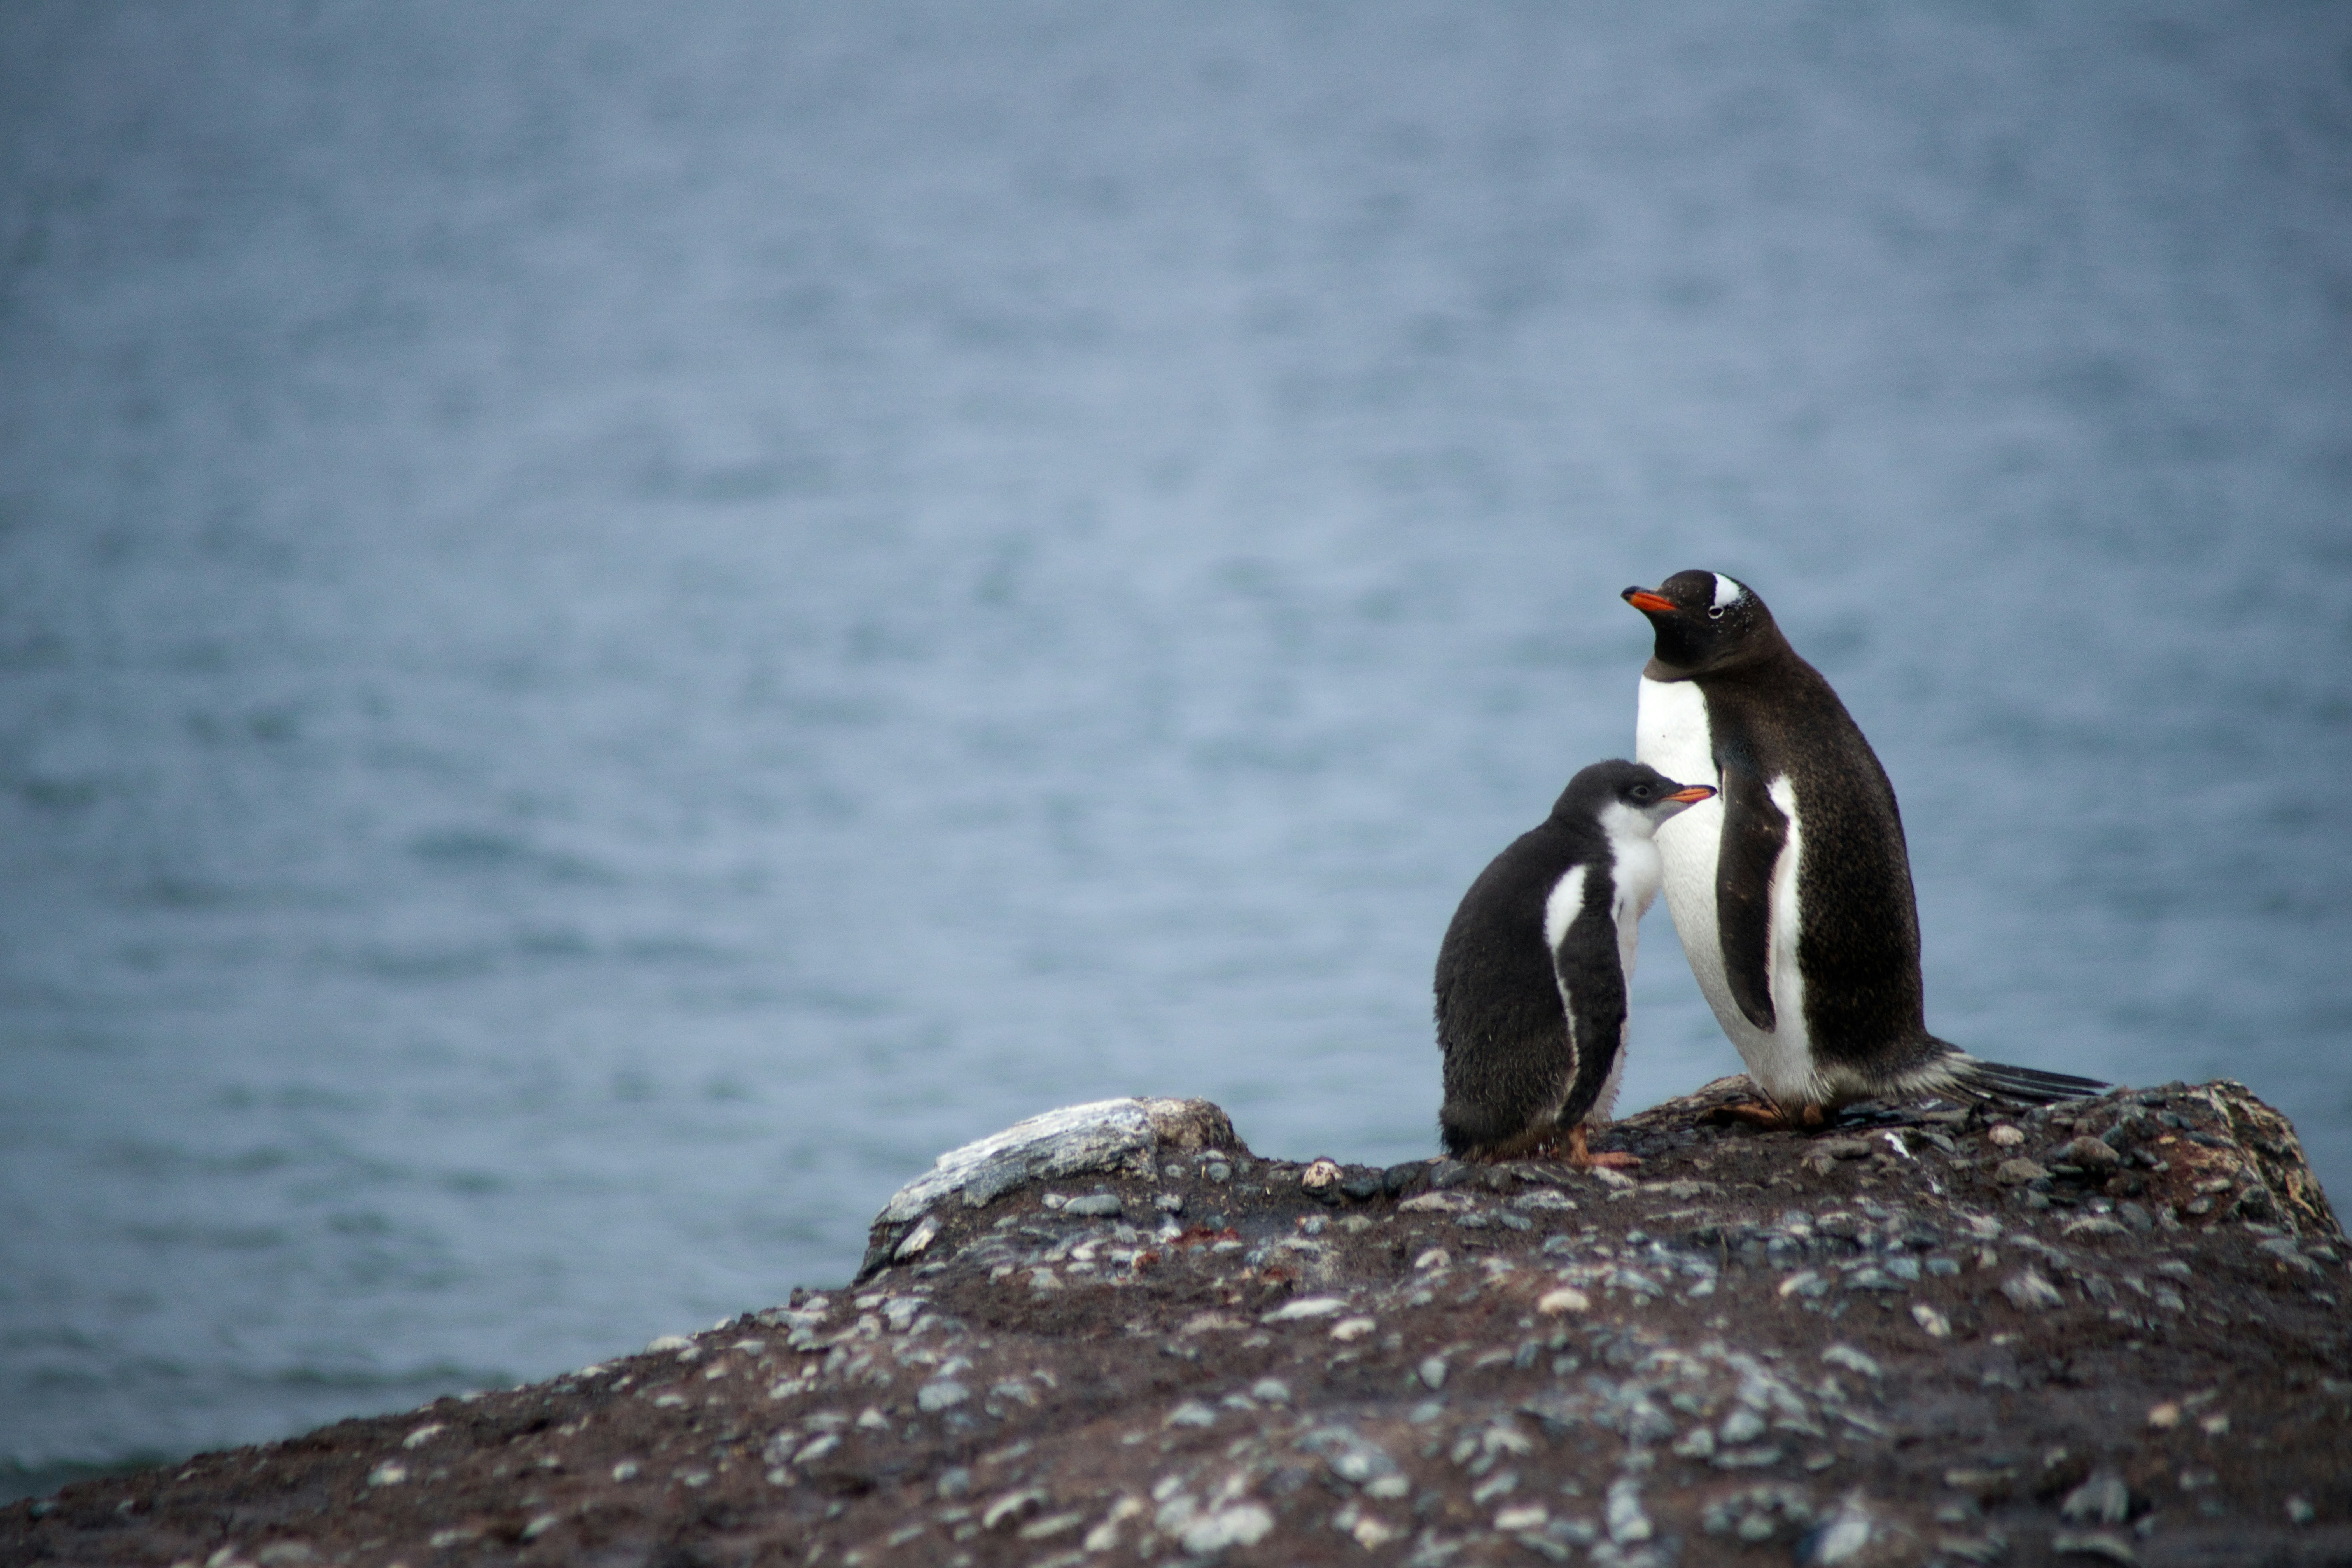 two penguin on rock formation near body of water